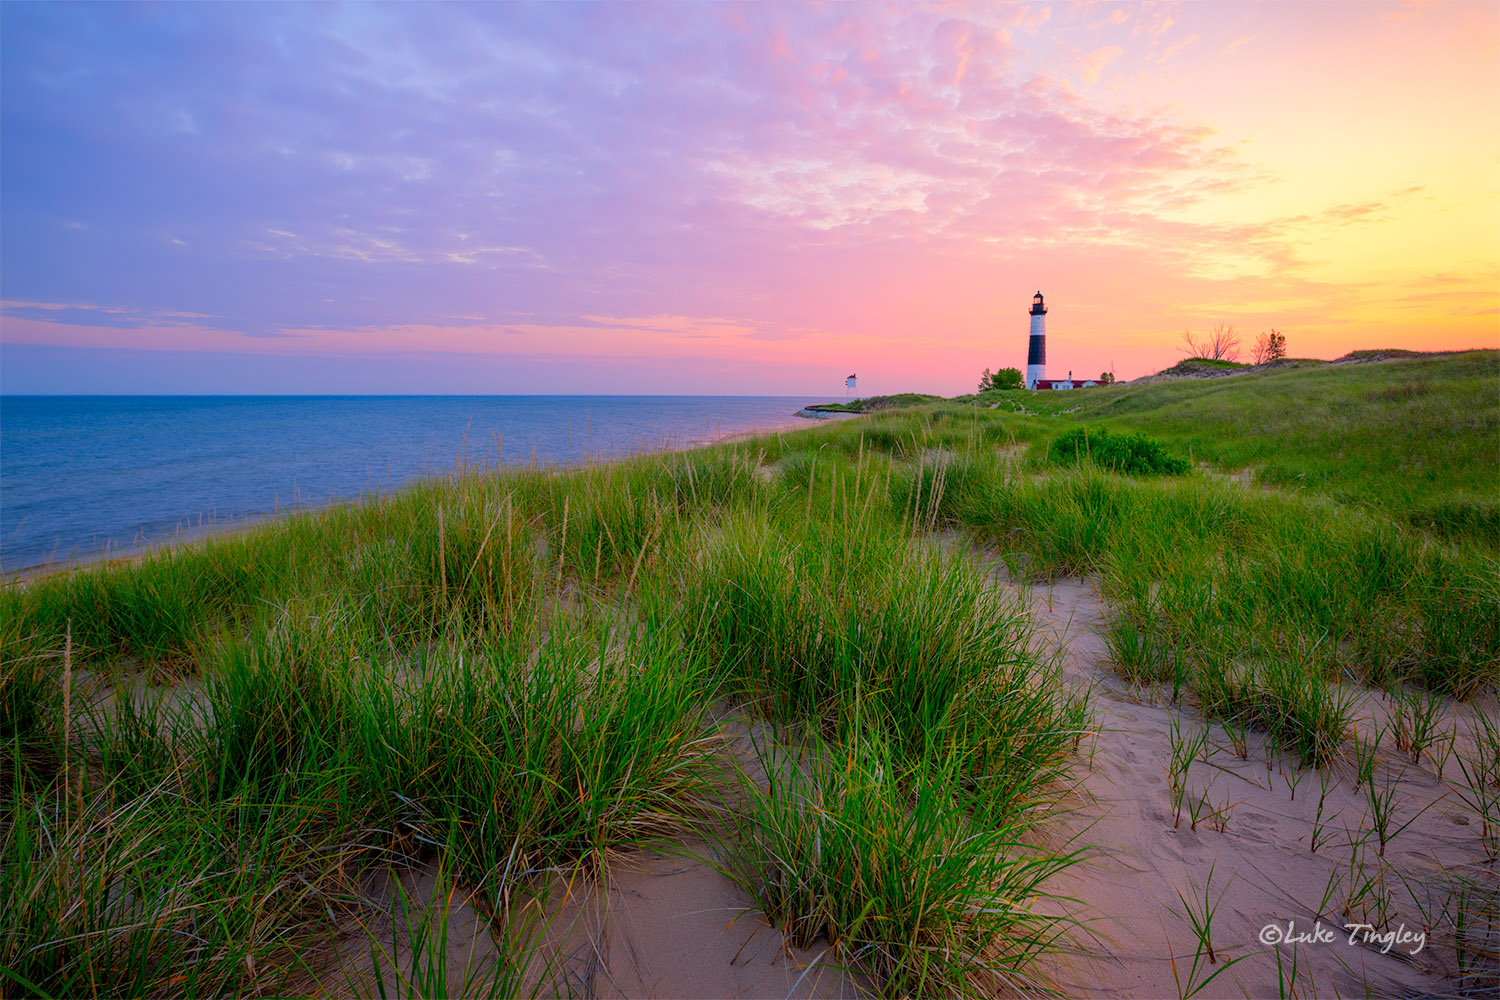 Big Sable Point - Moments after the lighthouse light winked out, sunrise breaks on a beautiful morning after a storm on the shores...